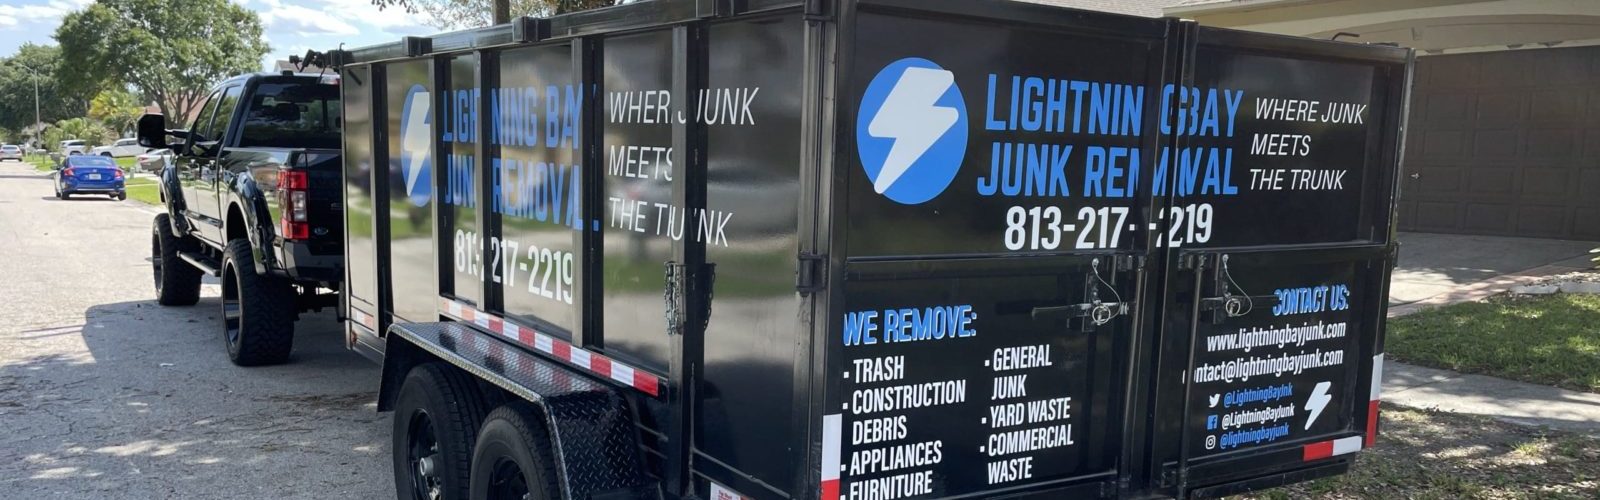 Junk removal services by Lightning Bay Junk Removal